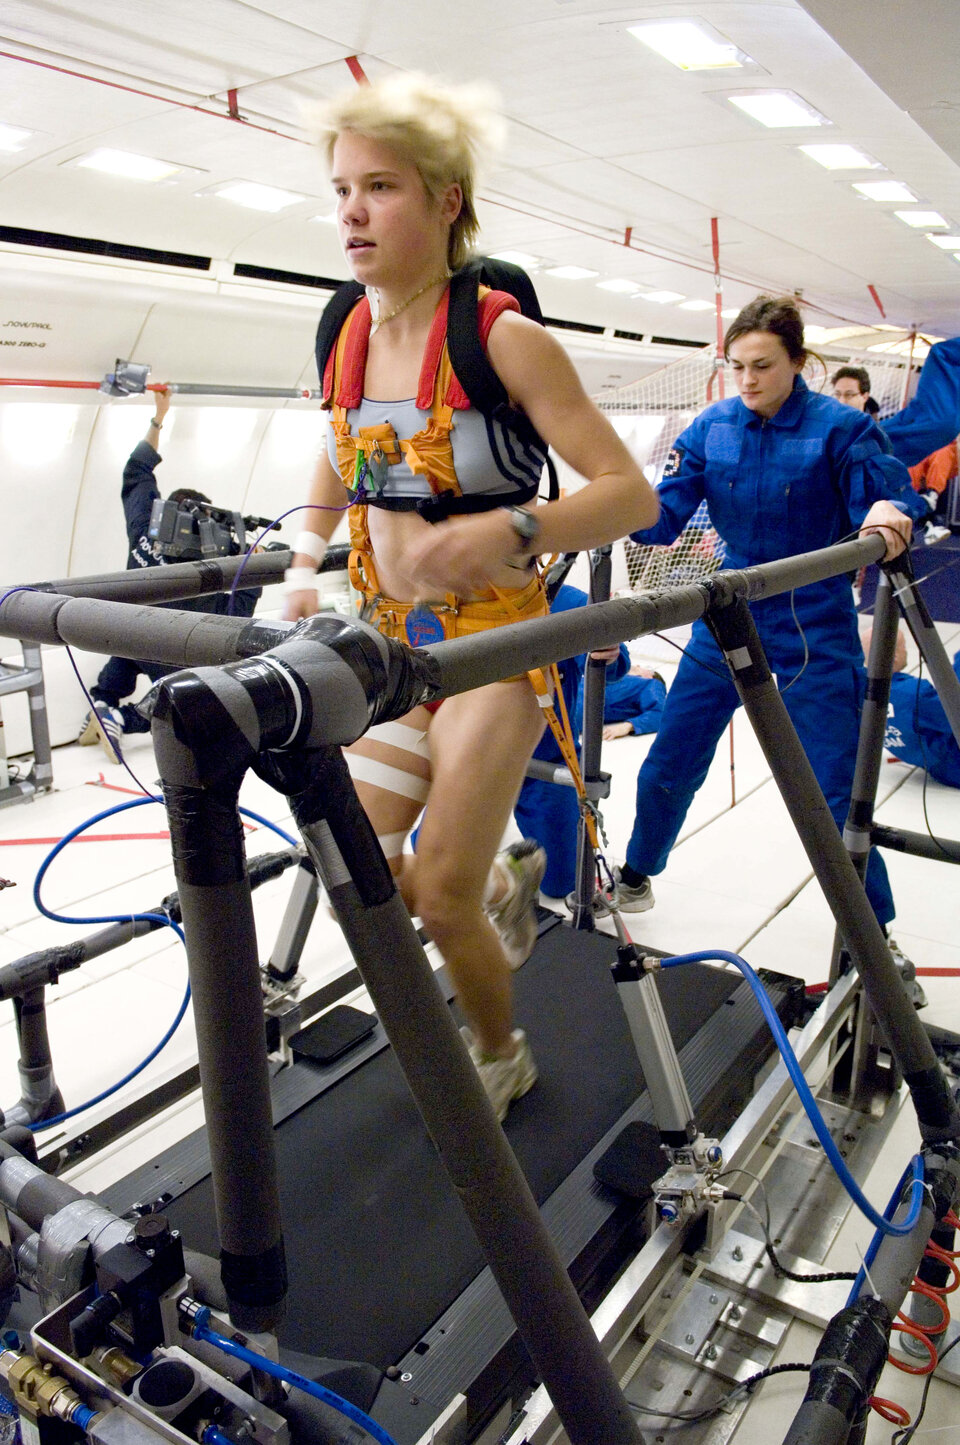 Physiology experiment during parabolic flight